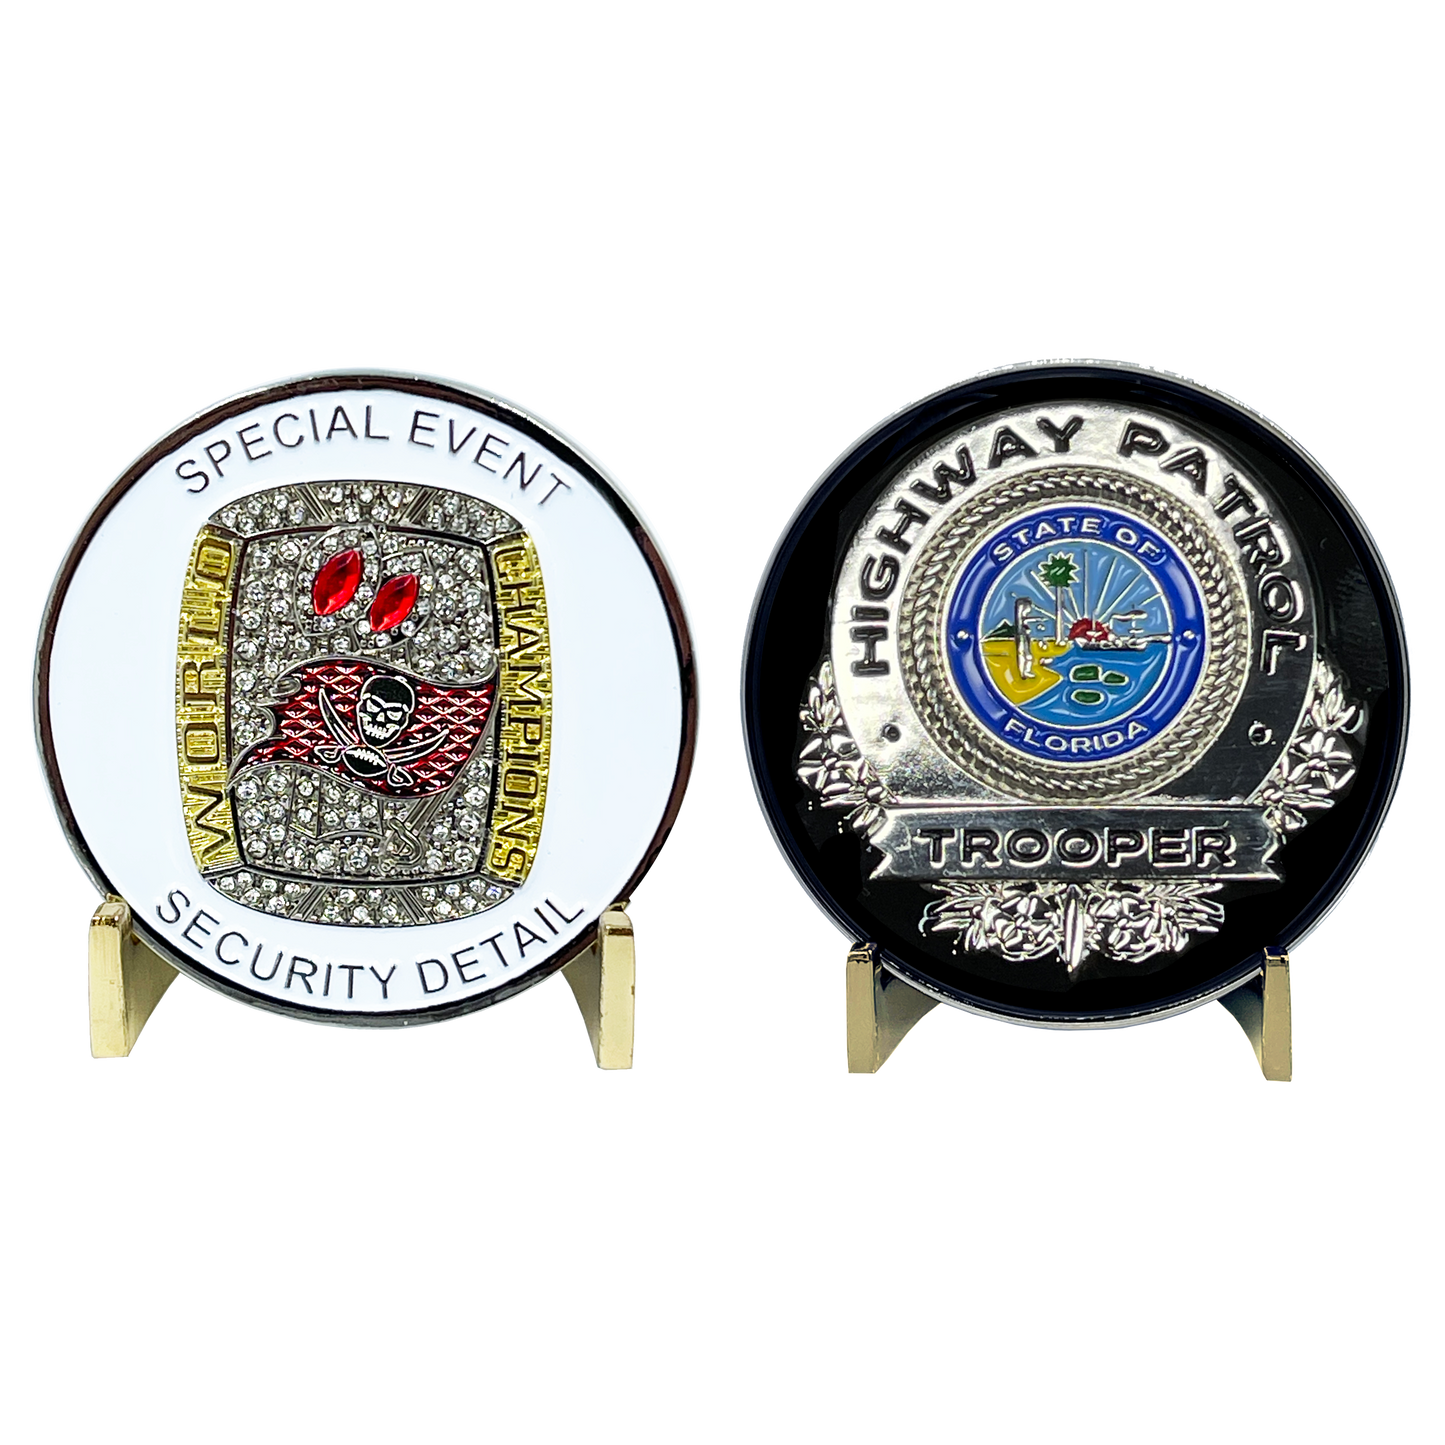 BL10-003 Tampa Bay Bucs FHP Trooper Police Florida Highway Patrol Buccaneers Special Event Security Detail Brady Ring Challenge Coin